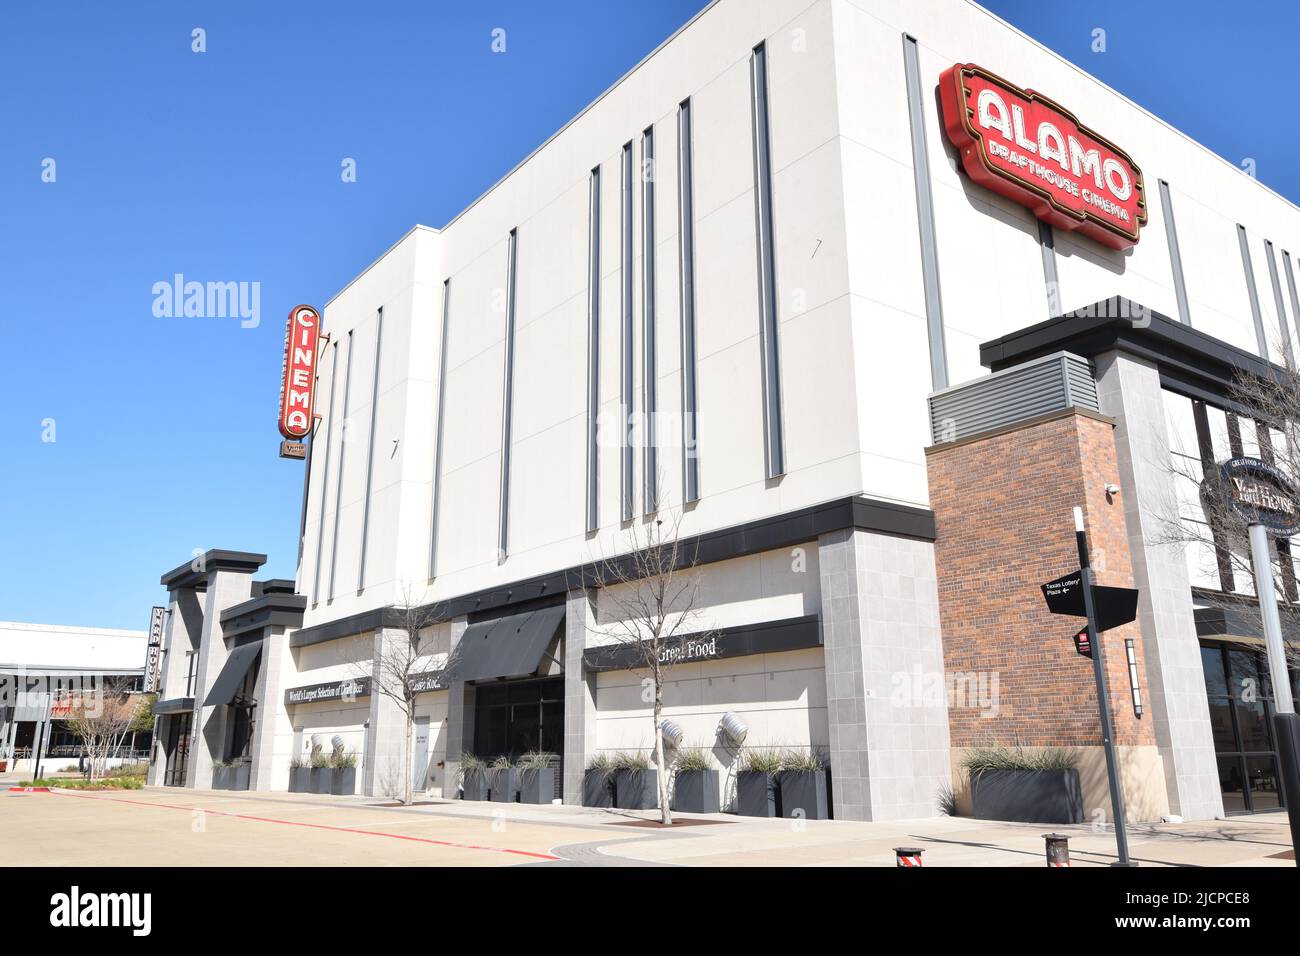 The Alamo Drafthouse Cinema at the Toyota Music Factory in Irving, Texas Stock Photo